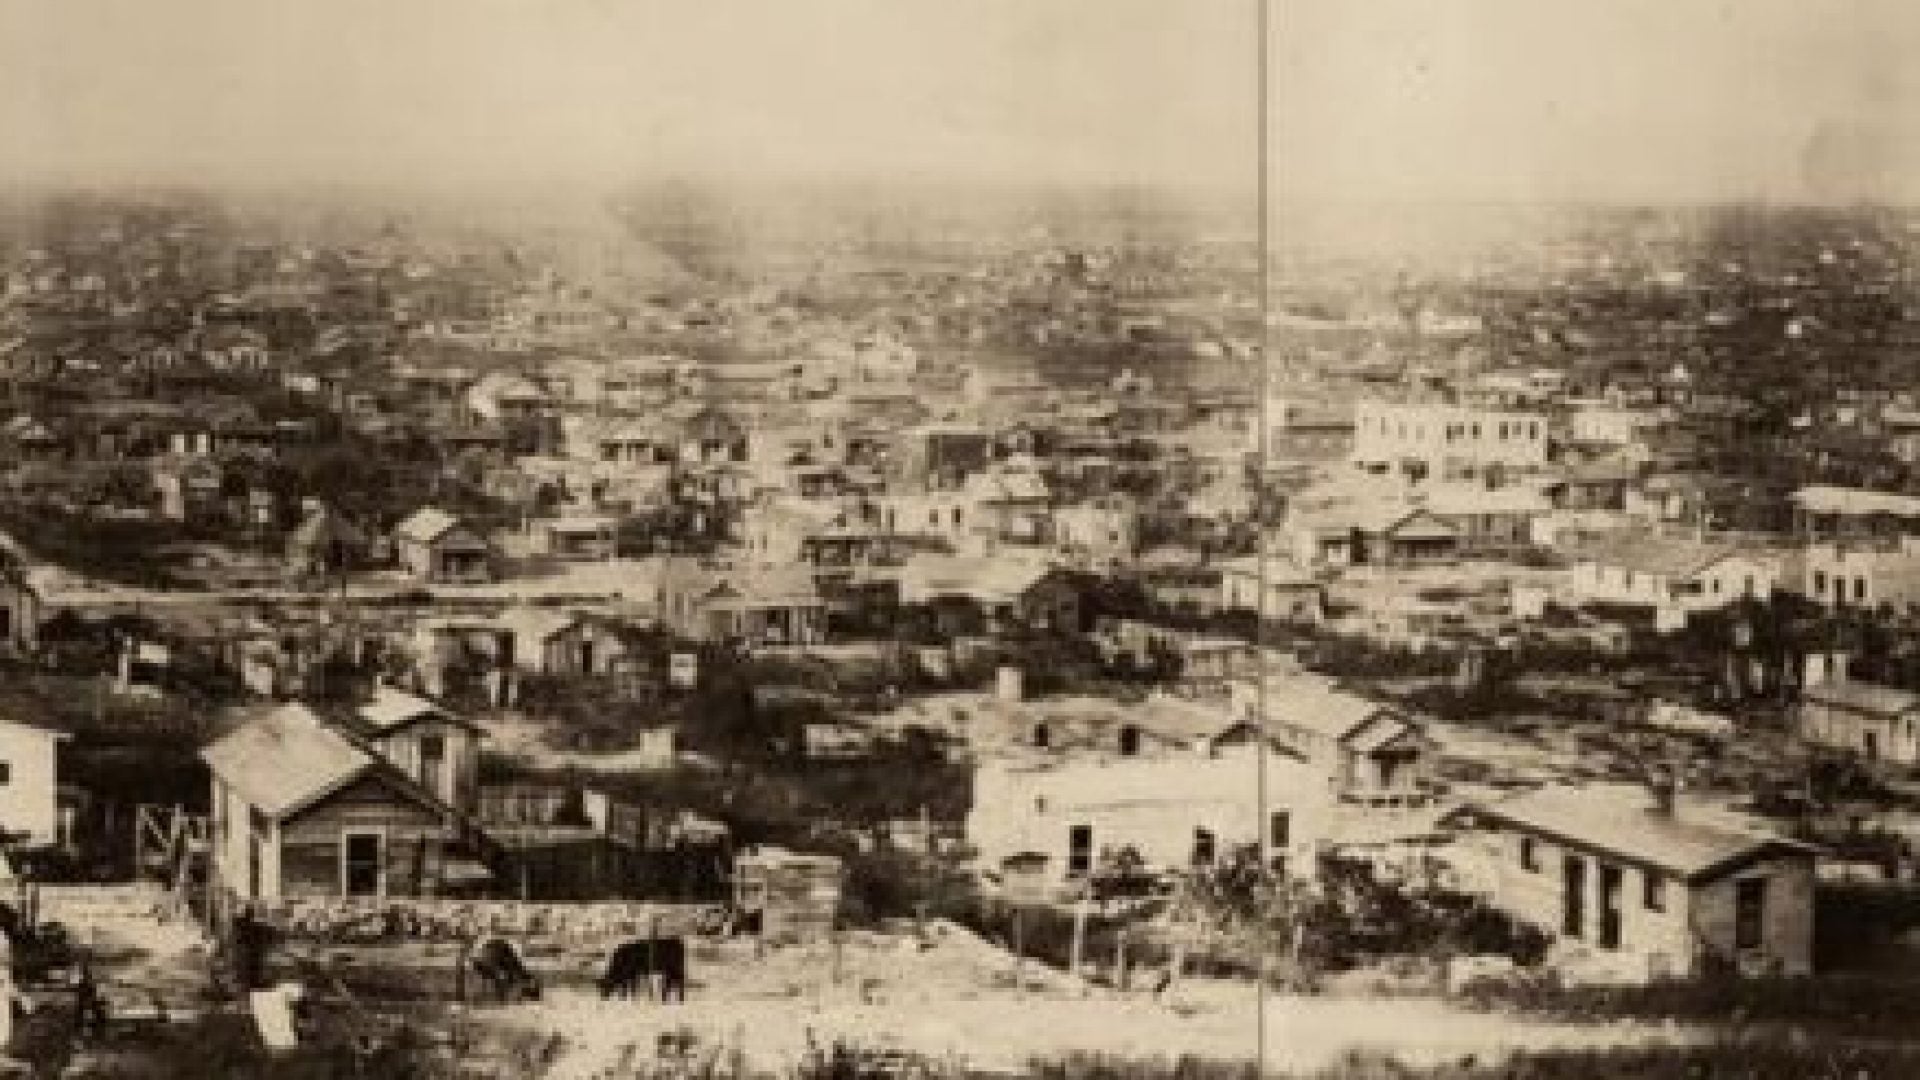 Tulsa, 100 Years Later: Black Wall Street Remembered